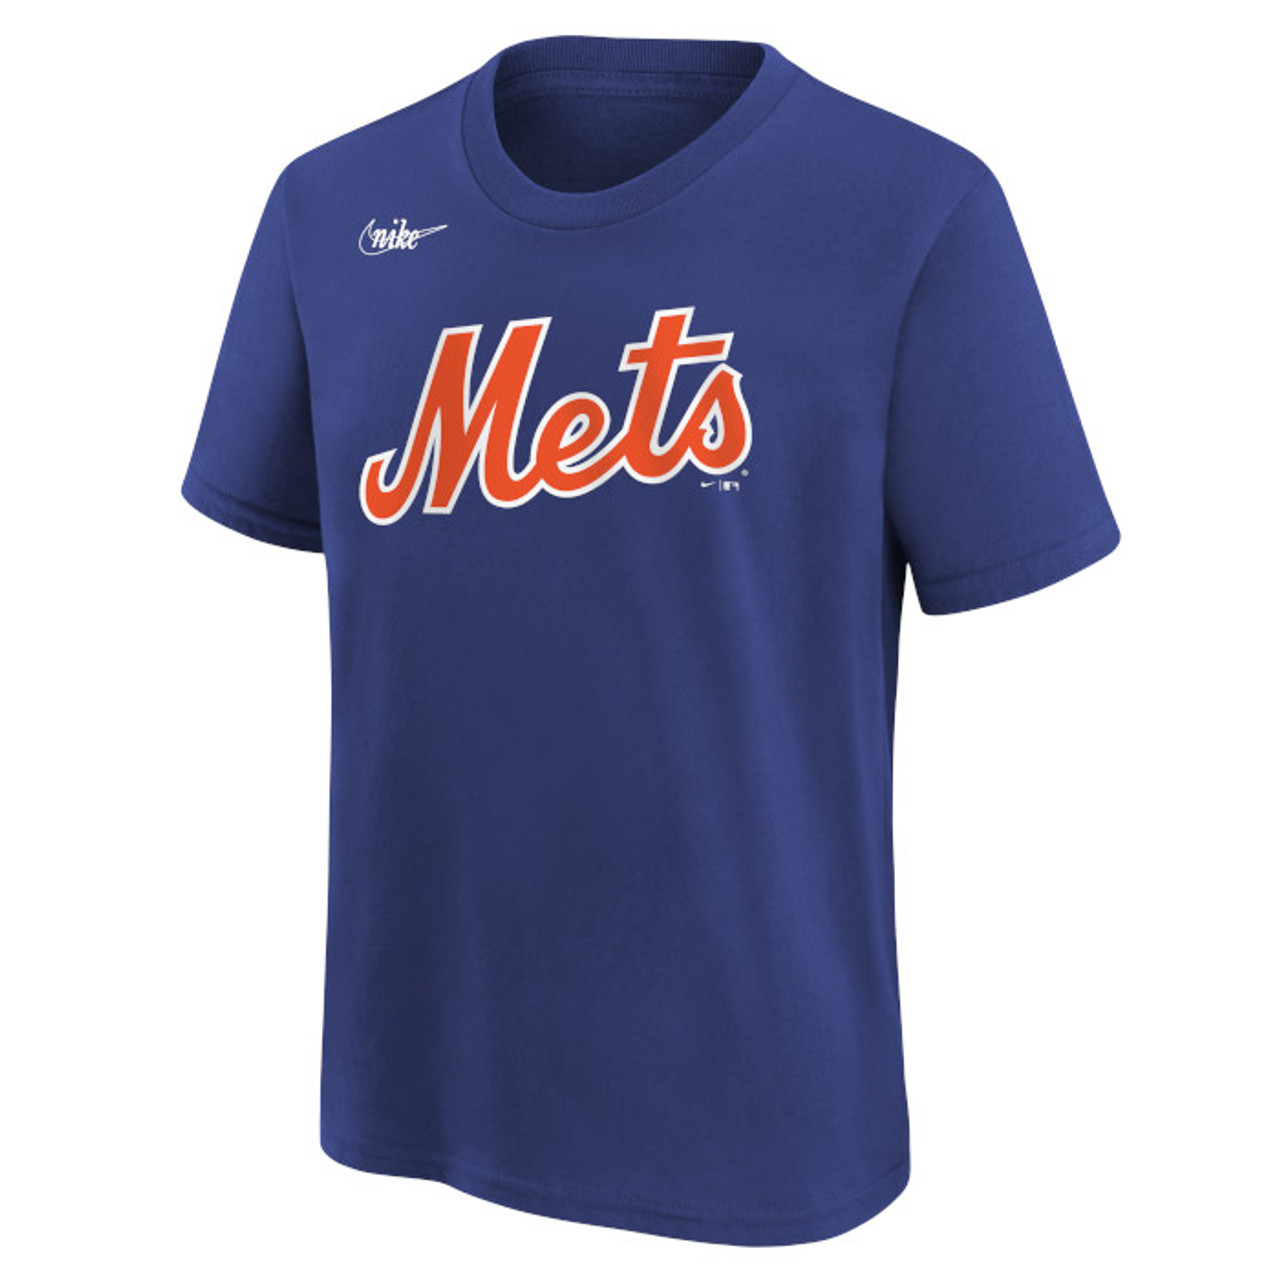 mike piazza youth jersey